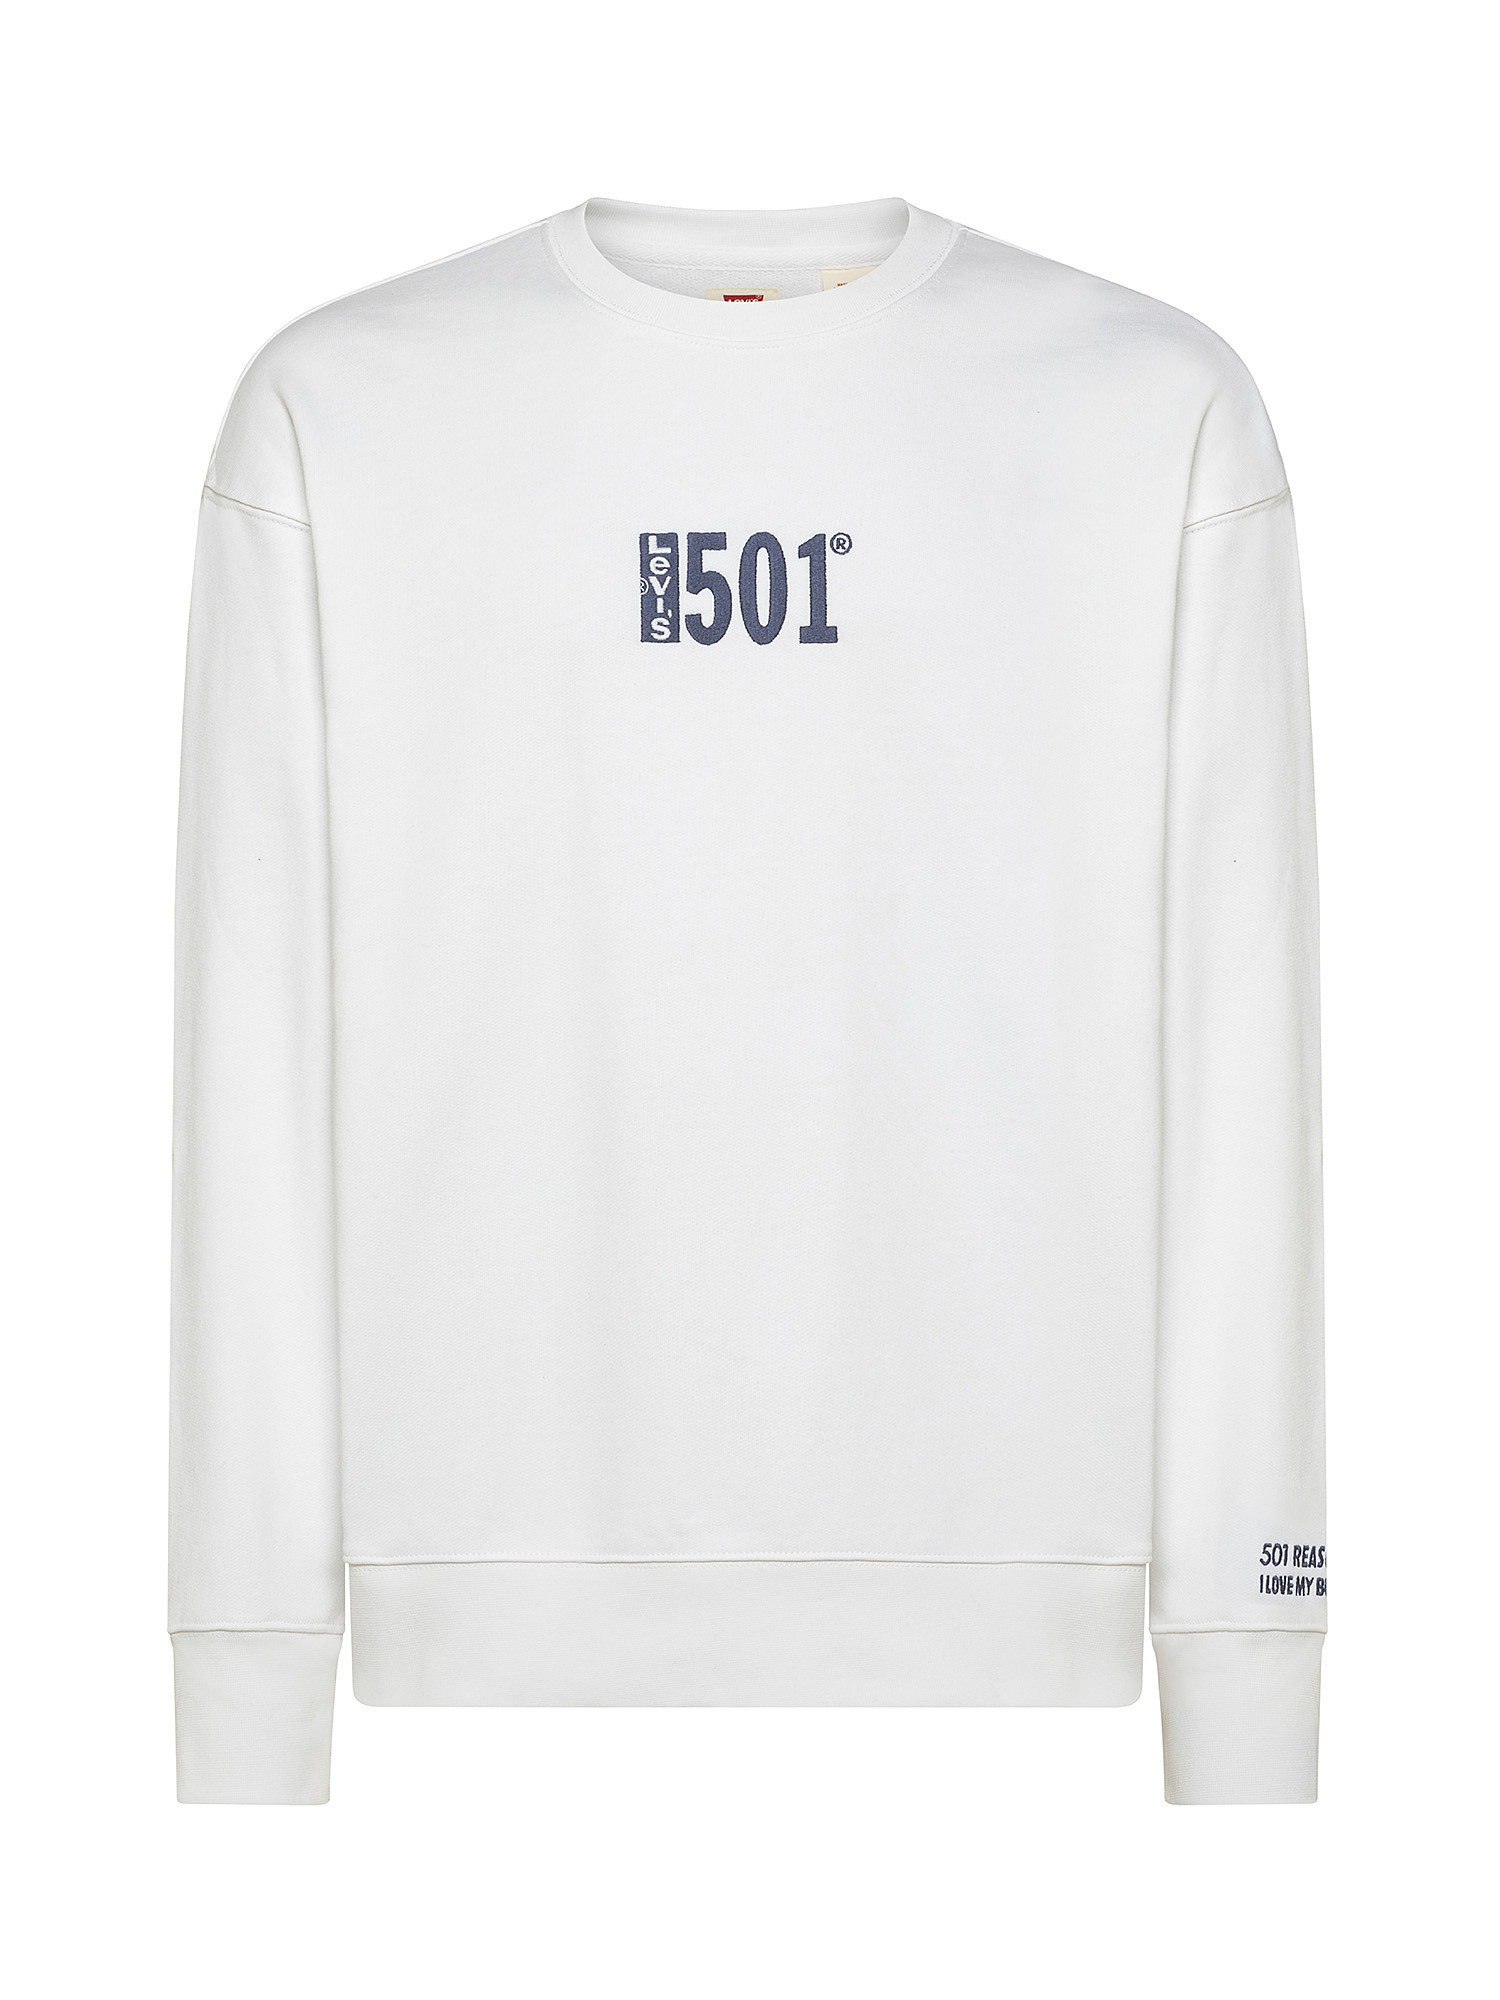 Sweatshirt with embroidery, White, large image number 0